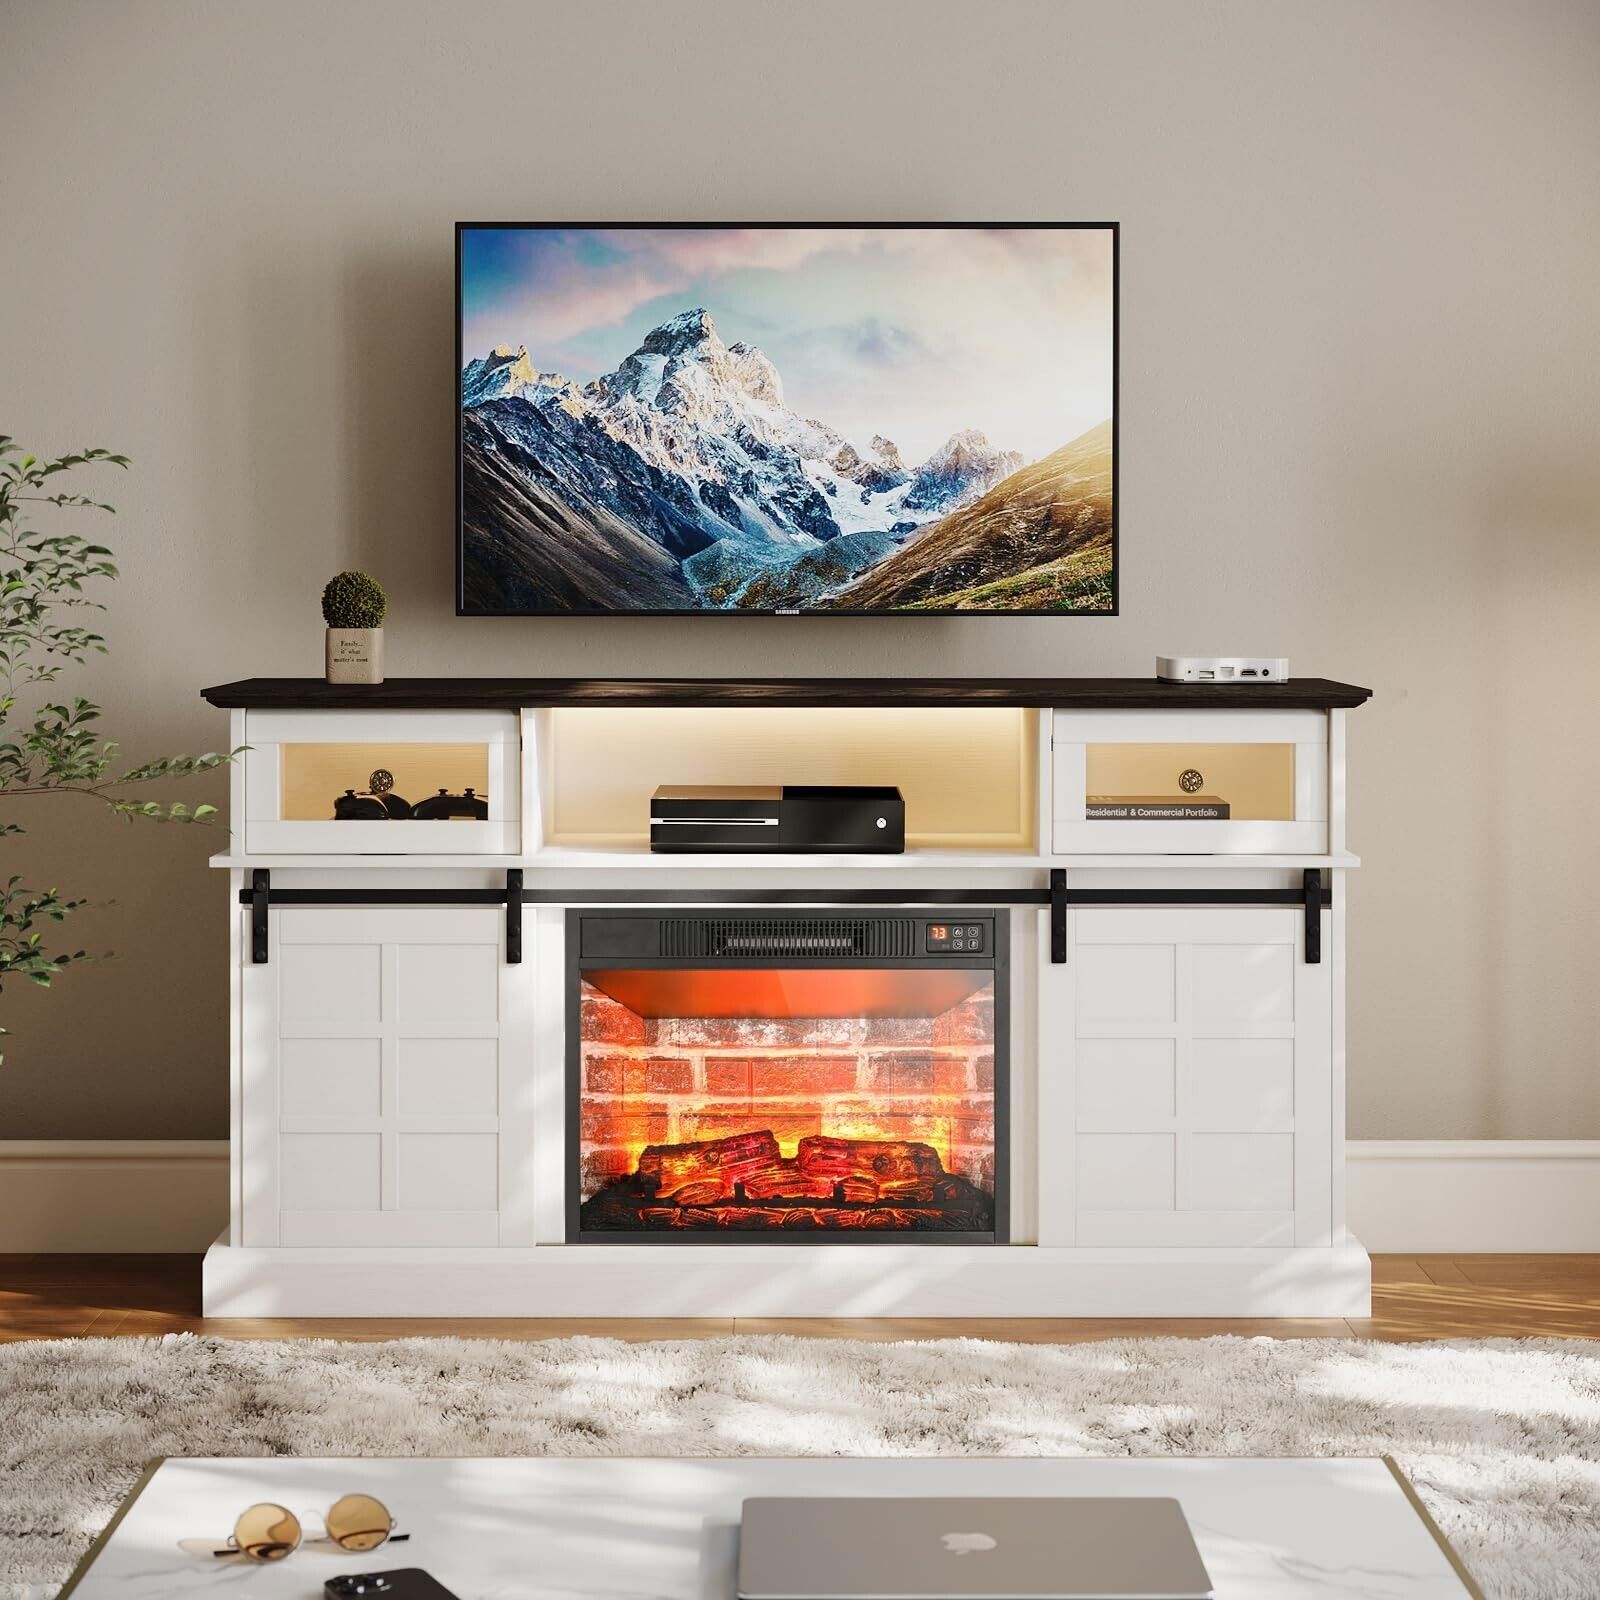 Fireplace Tv Stand W/ Led Lights & 23" Electric Fireplace For Tvs Up To 65"  | Ebay Pertaining To Tv Stands With Electric Fireplace (View 10 of 15)